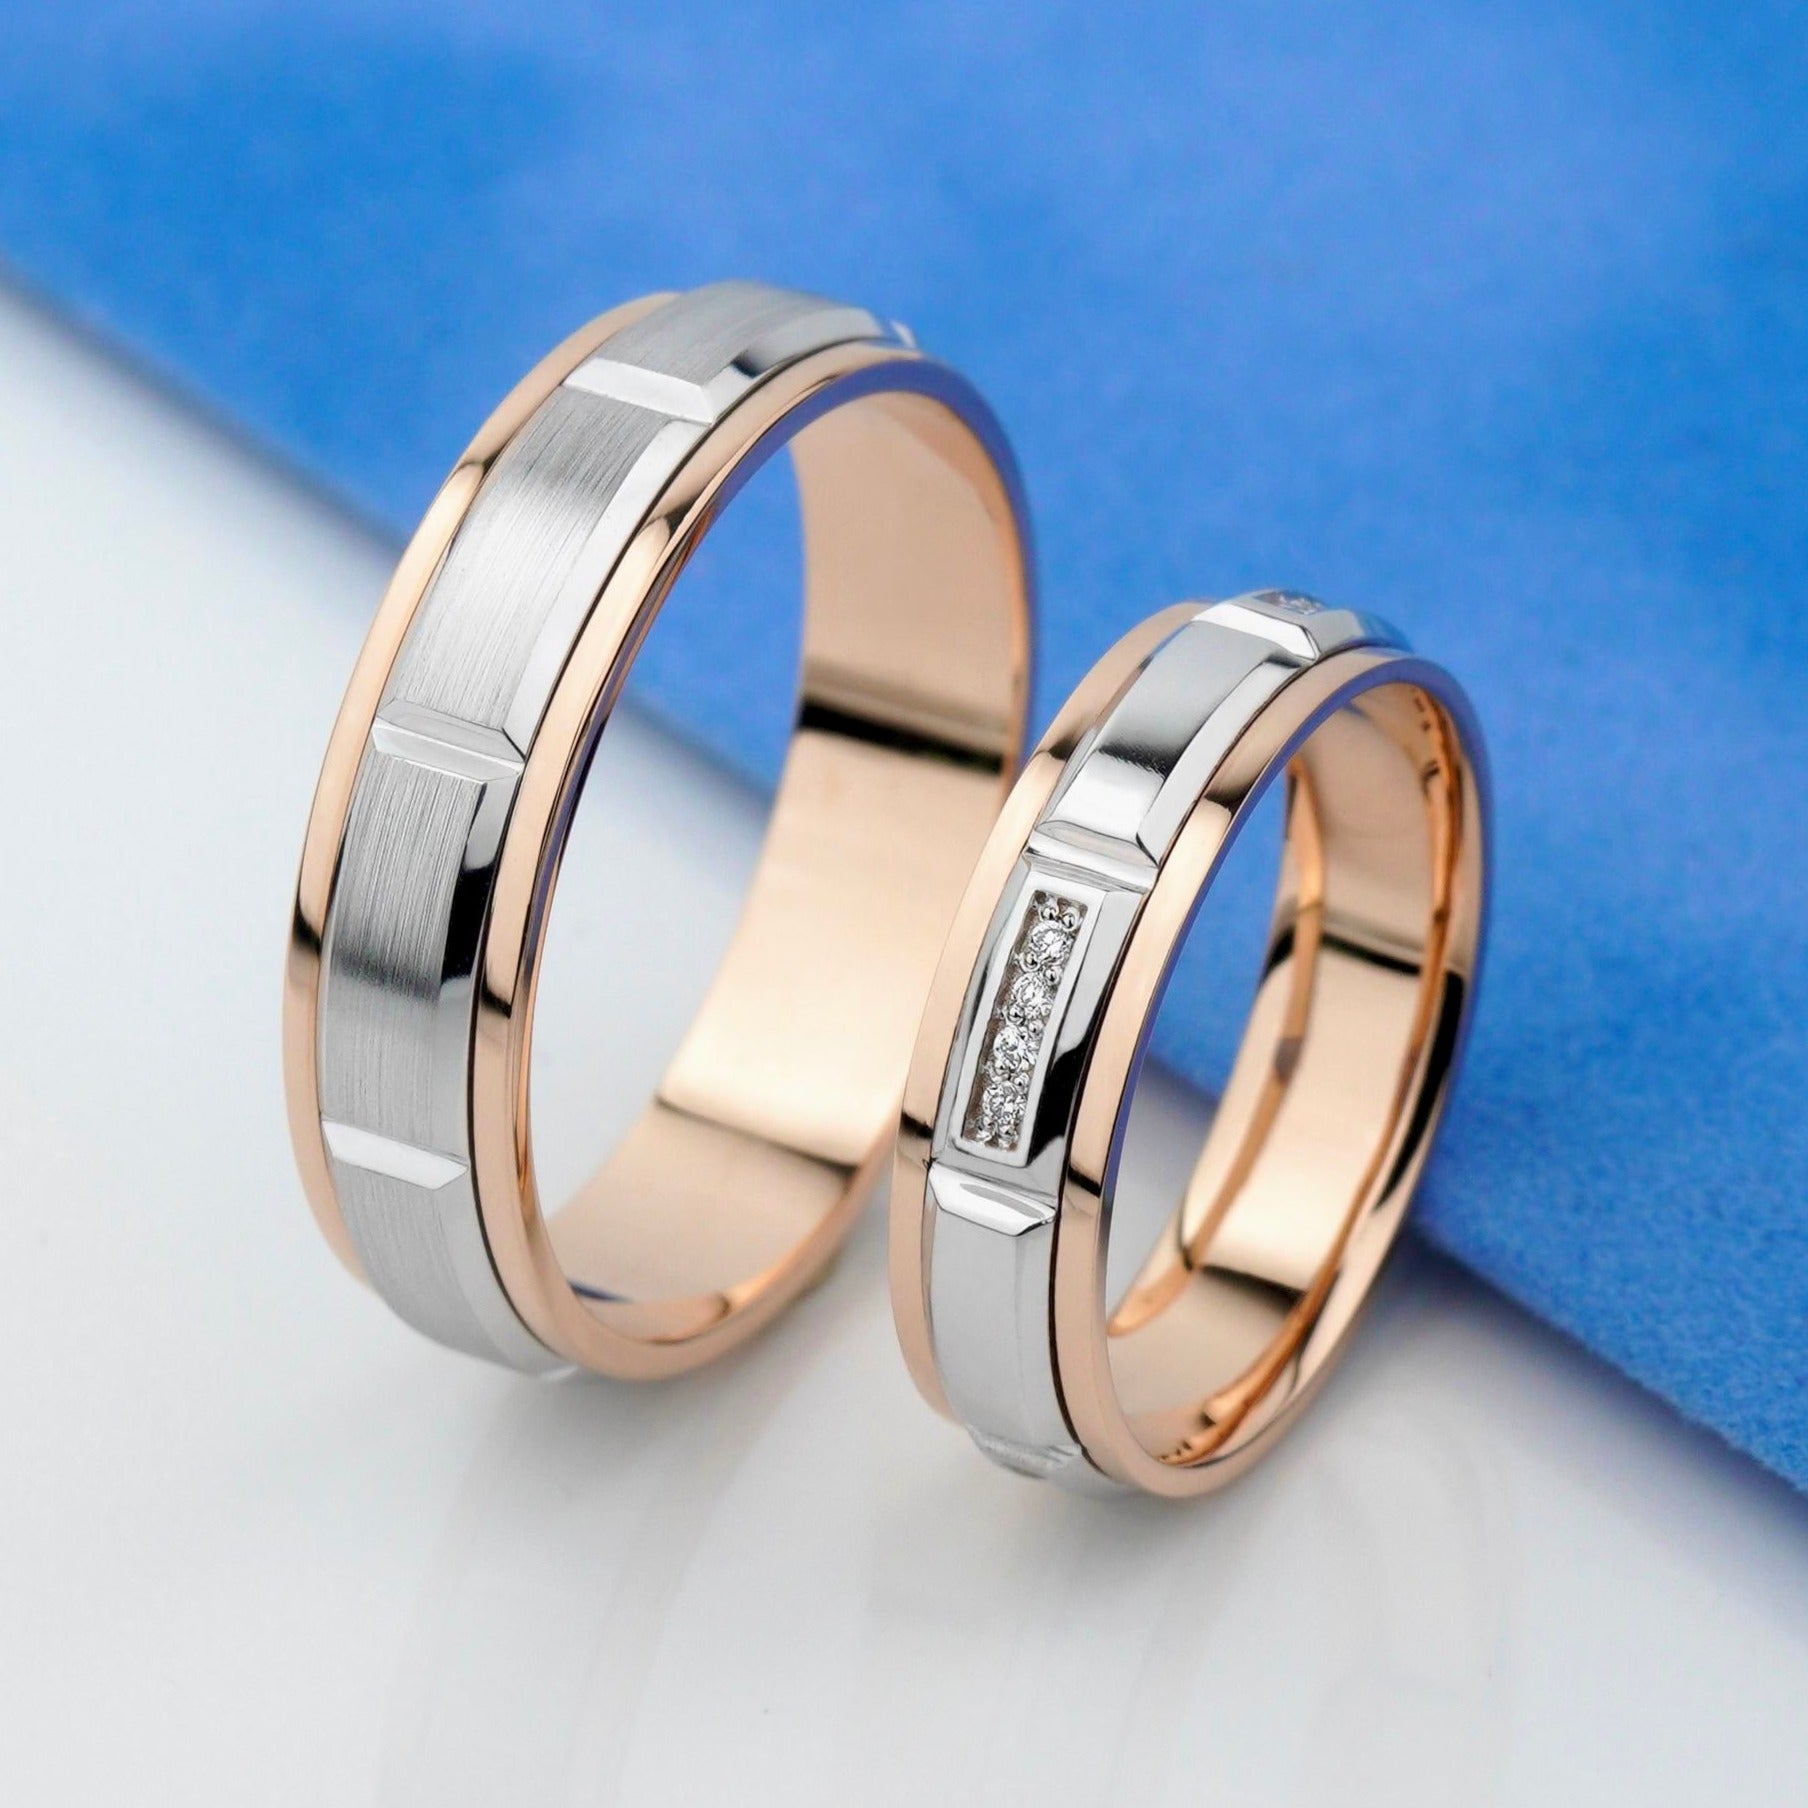 Wedding bands set his and hers. Unique wedding rings. Matching wedding bands. Couple wedding bands. Solid gold bands. Wedding rings set. Solid gold wedding bands. Matching wedding rings. 